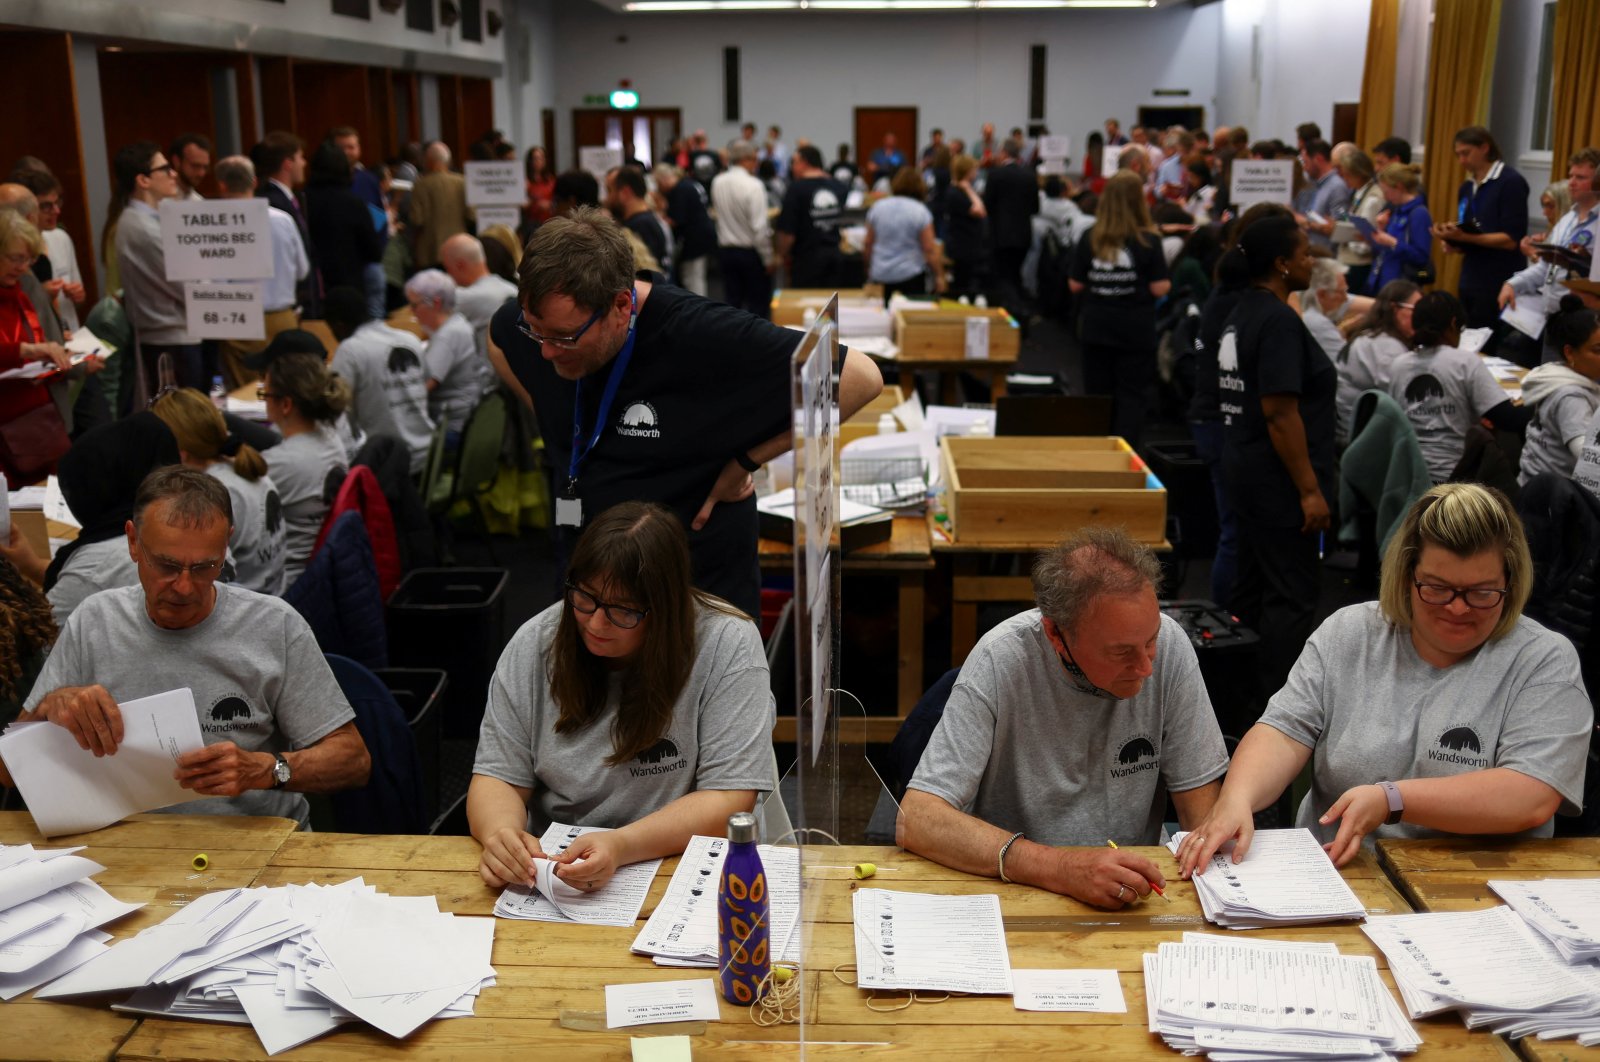 Ballots are counted during local elections, at Wandsworth Town Hall, London, Britain, May 5, 2022. (Reuters Photo)